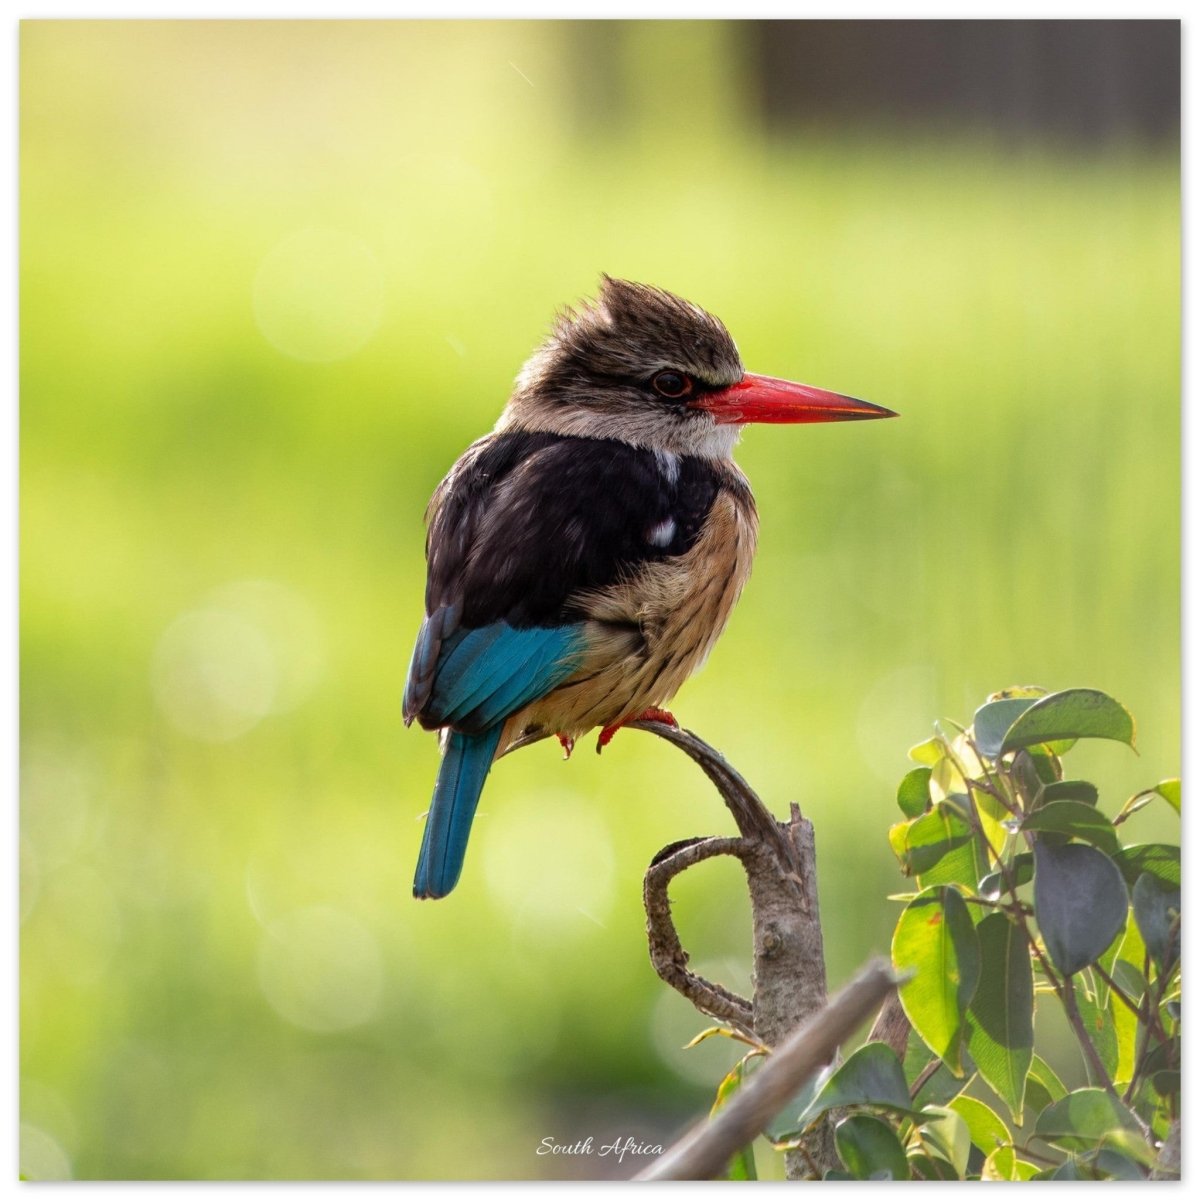 20x20 cm / 8x8″ Perched King Fisher by Picture This